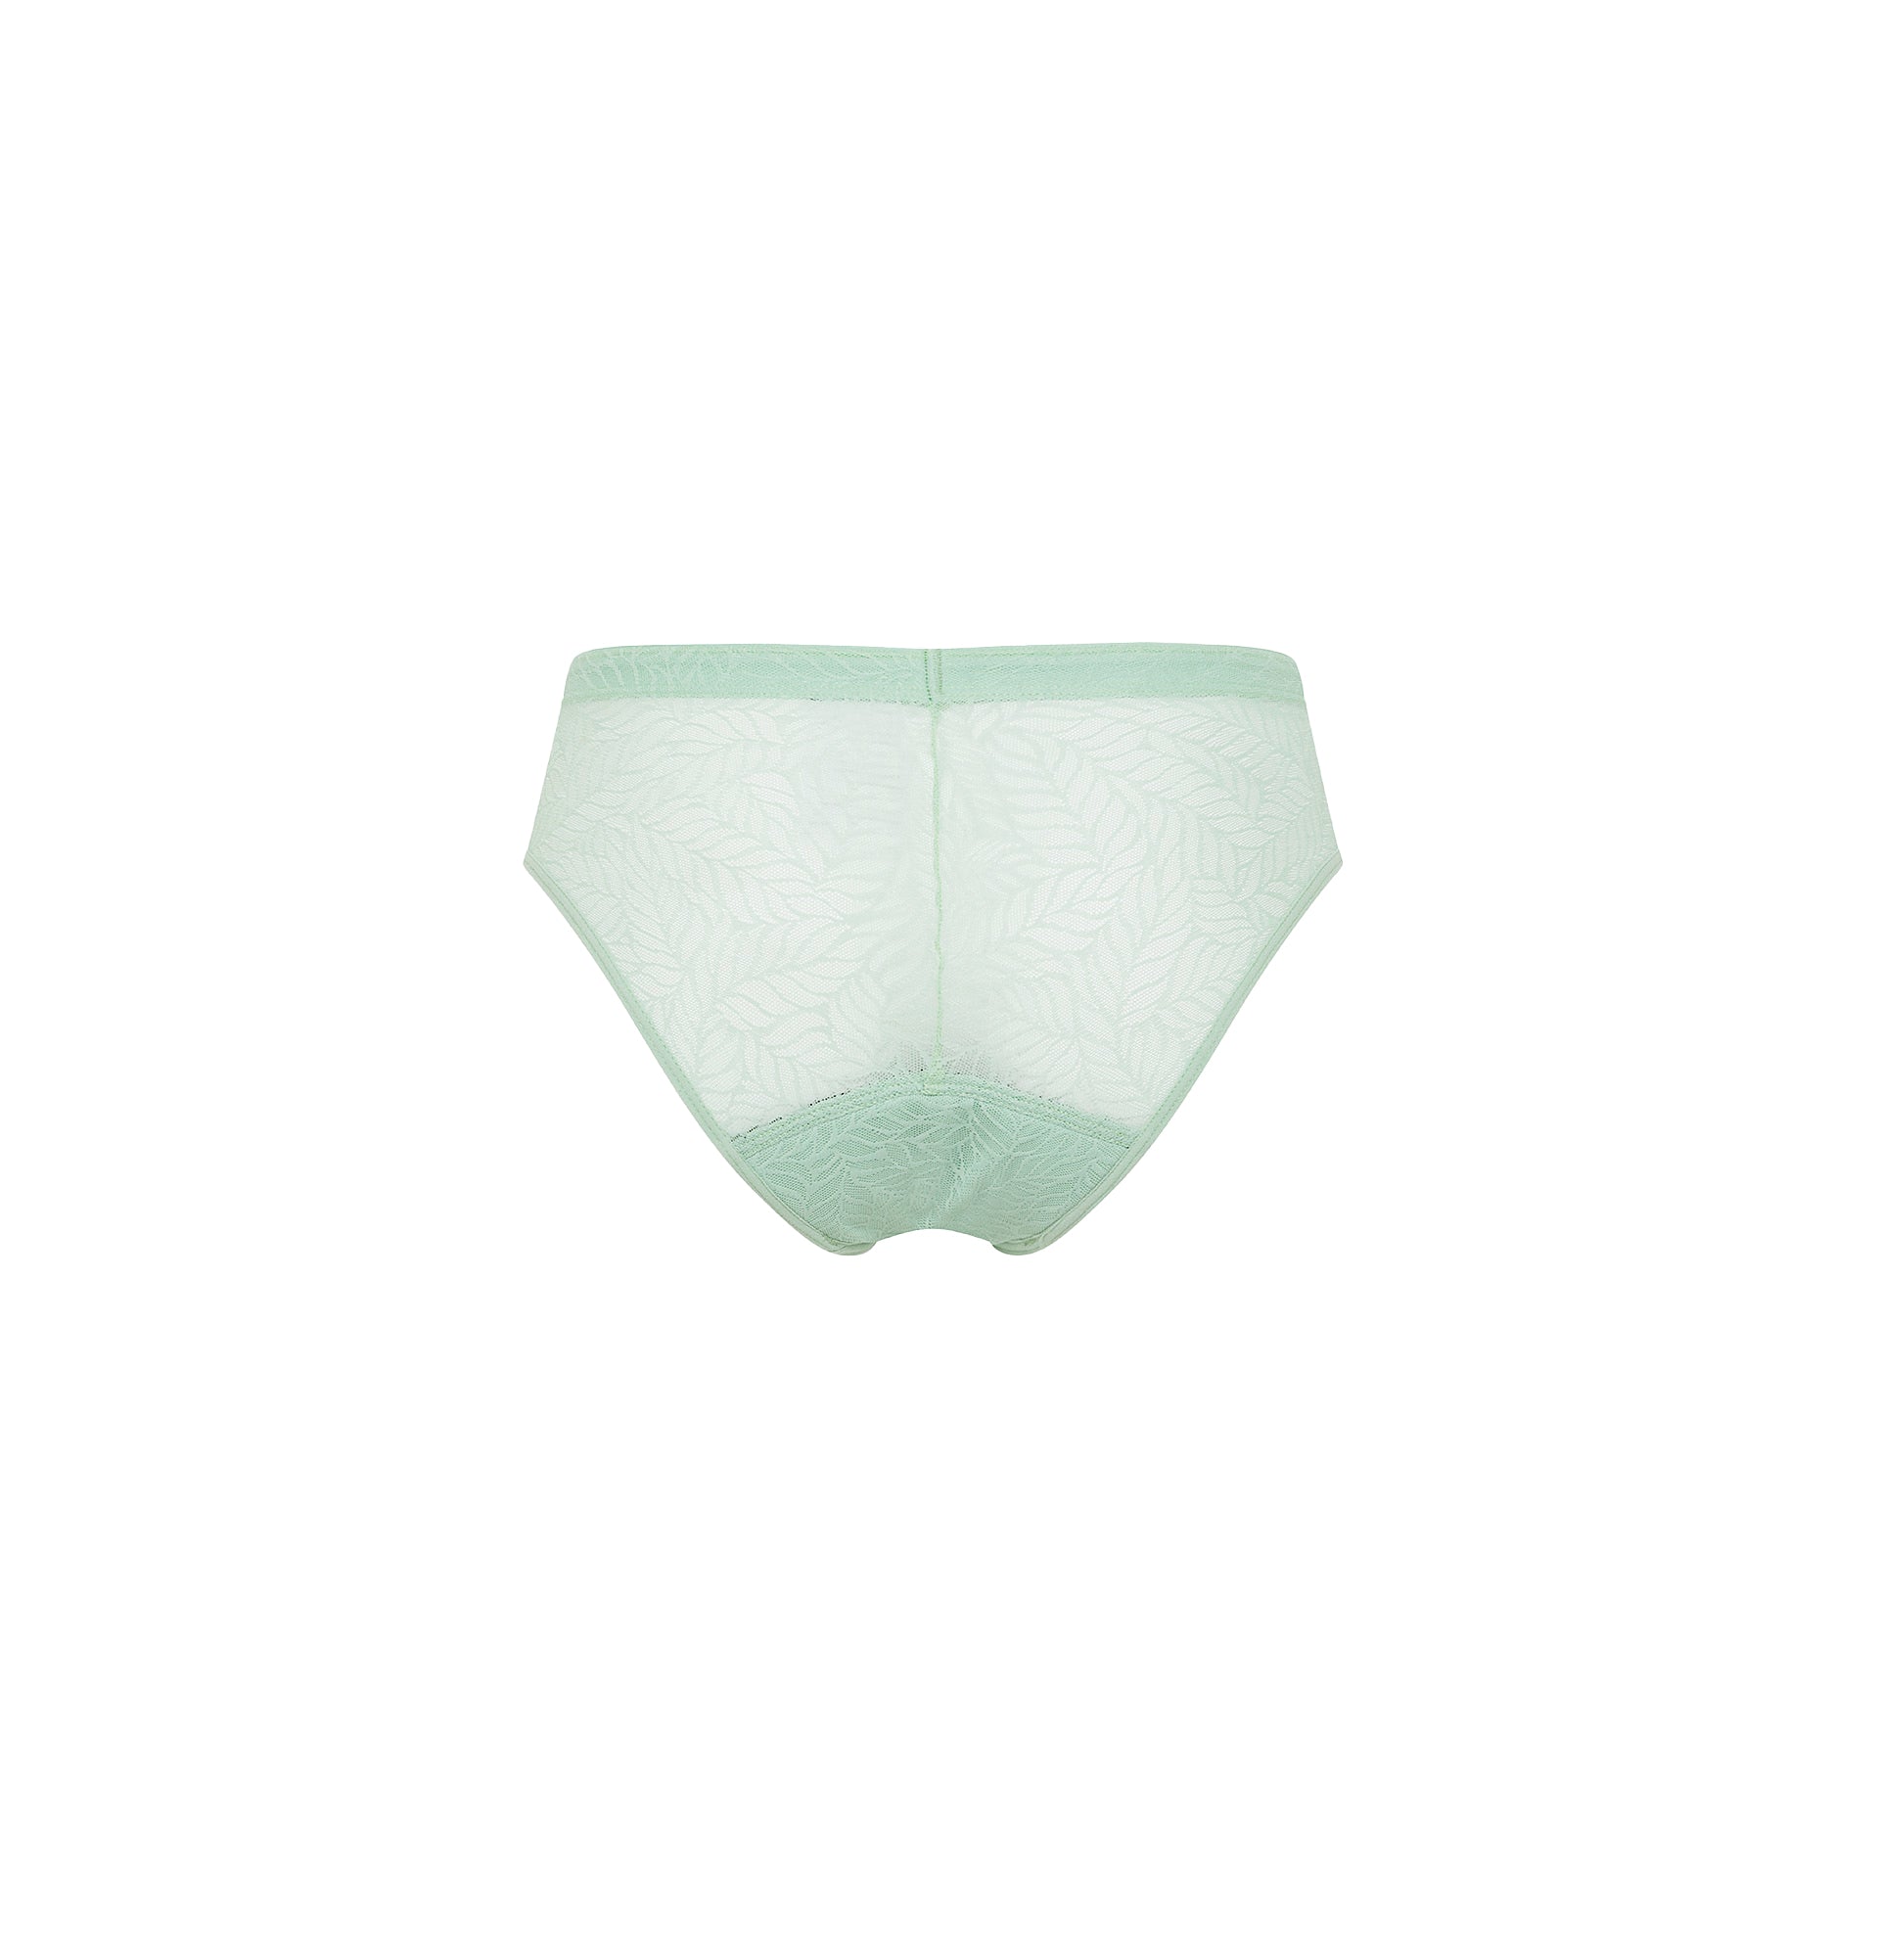 Eco-sustainable lace menstrual briefs